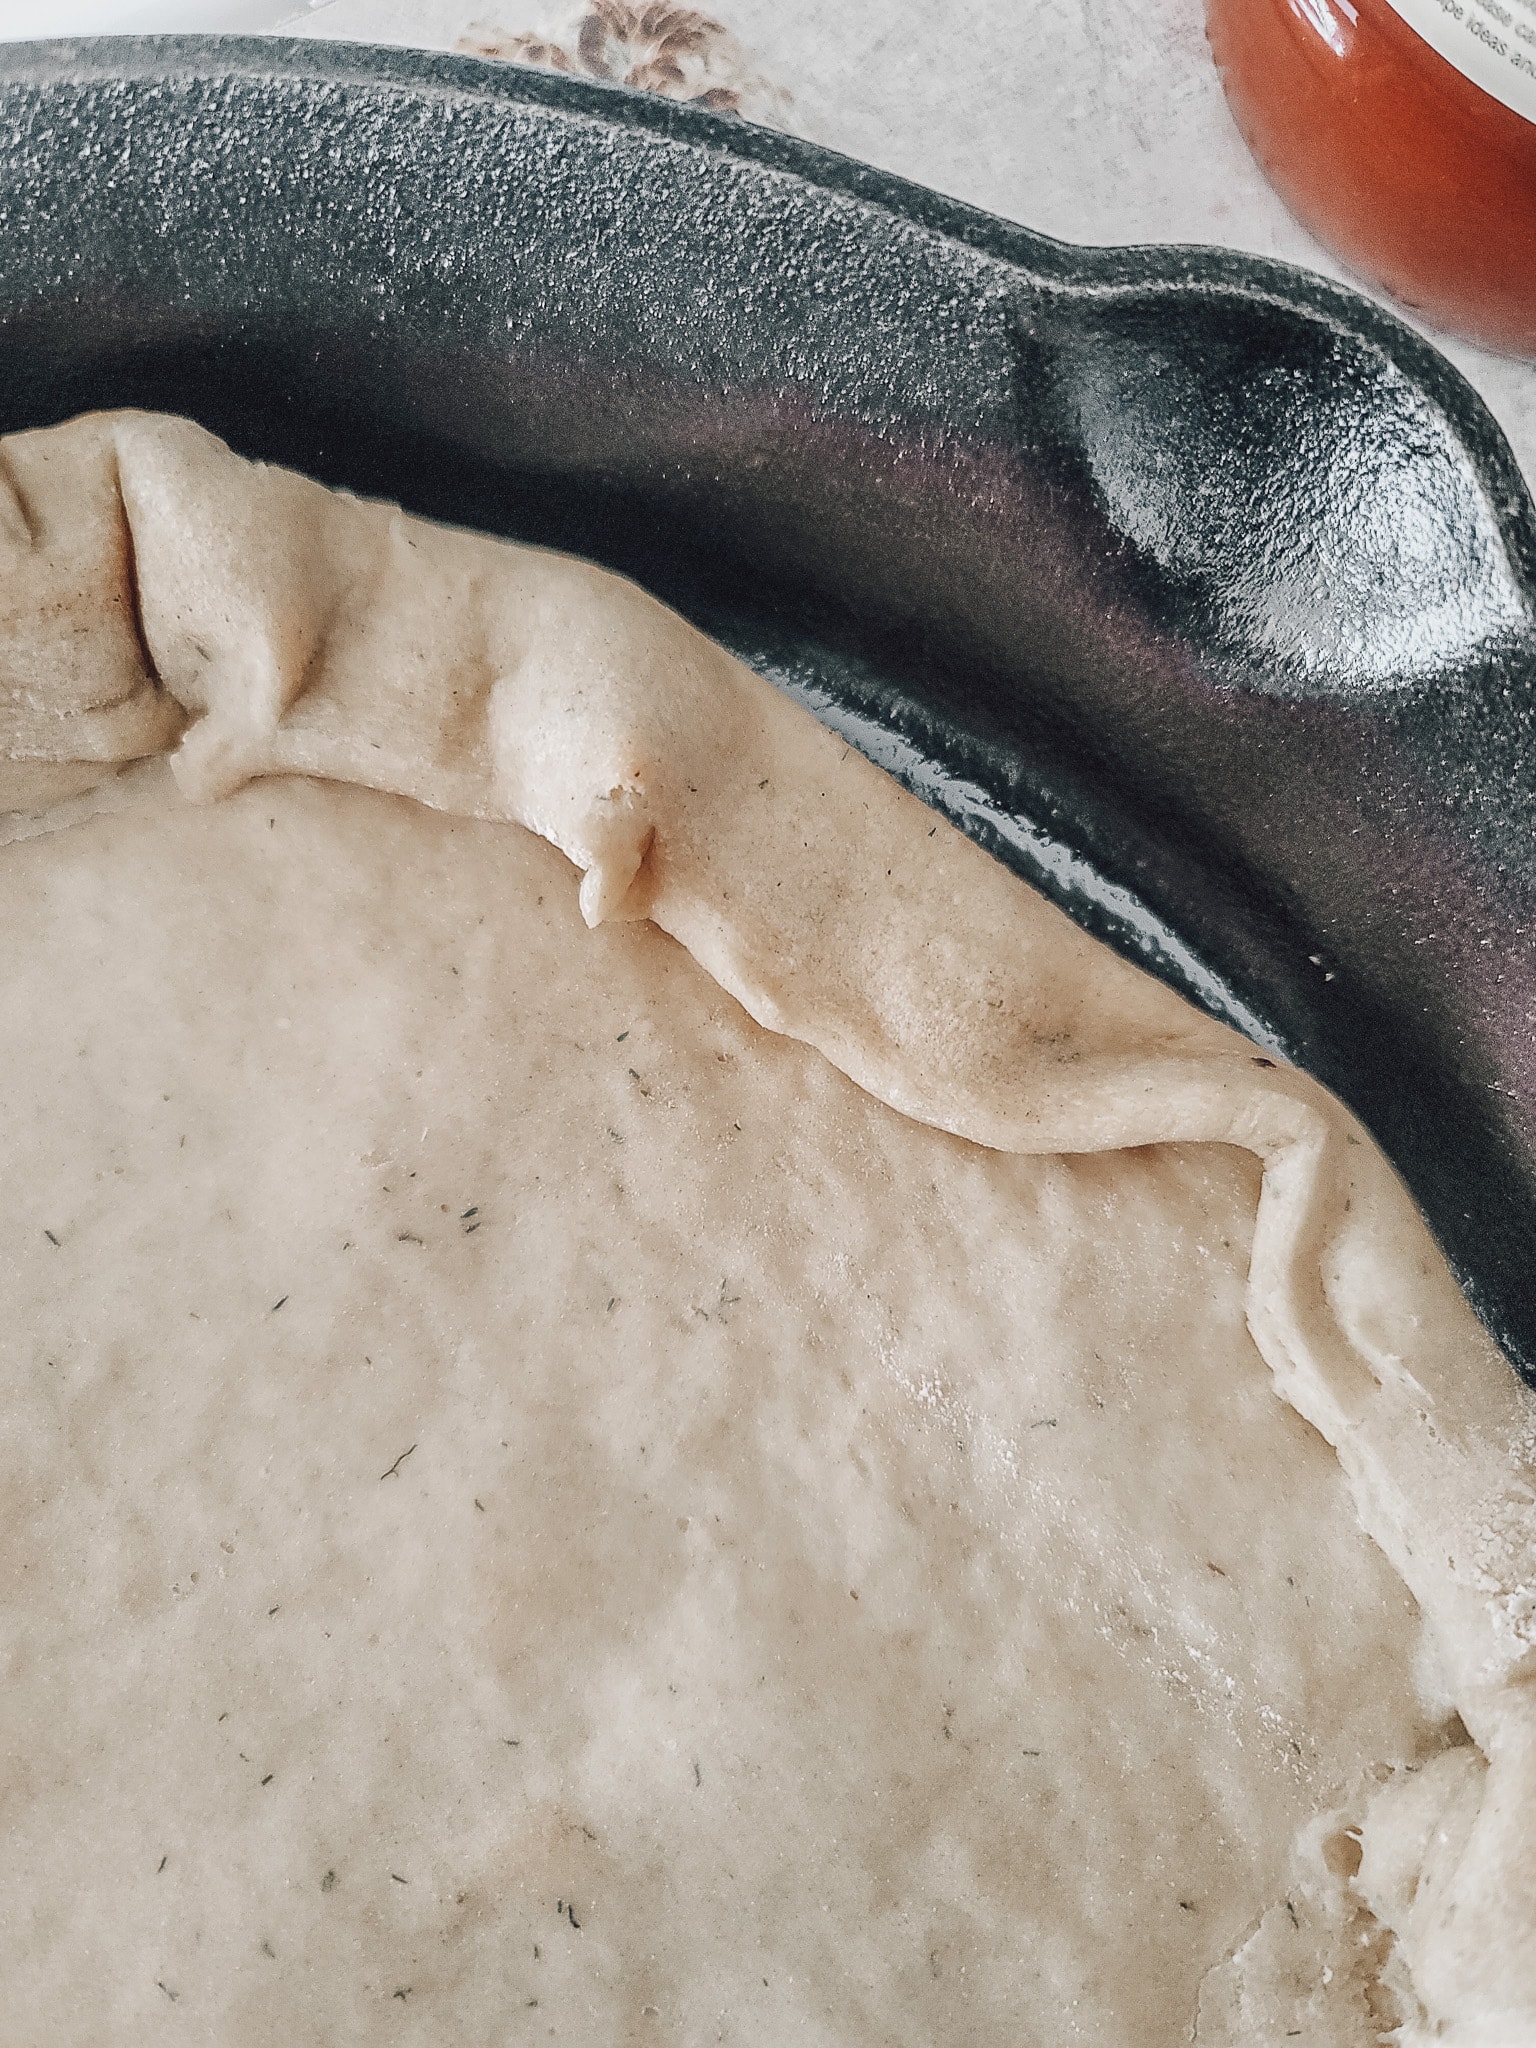 When the cast irons are ready, carefully remove them from the oven and drizzle them with oil. Place the dough inside and carefully fold over the corners to create a crust. Einkorn pizza dough